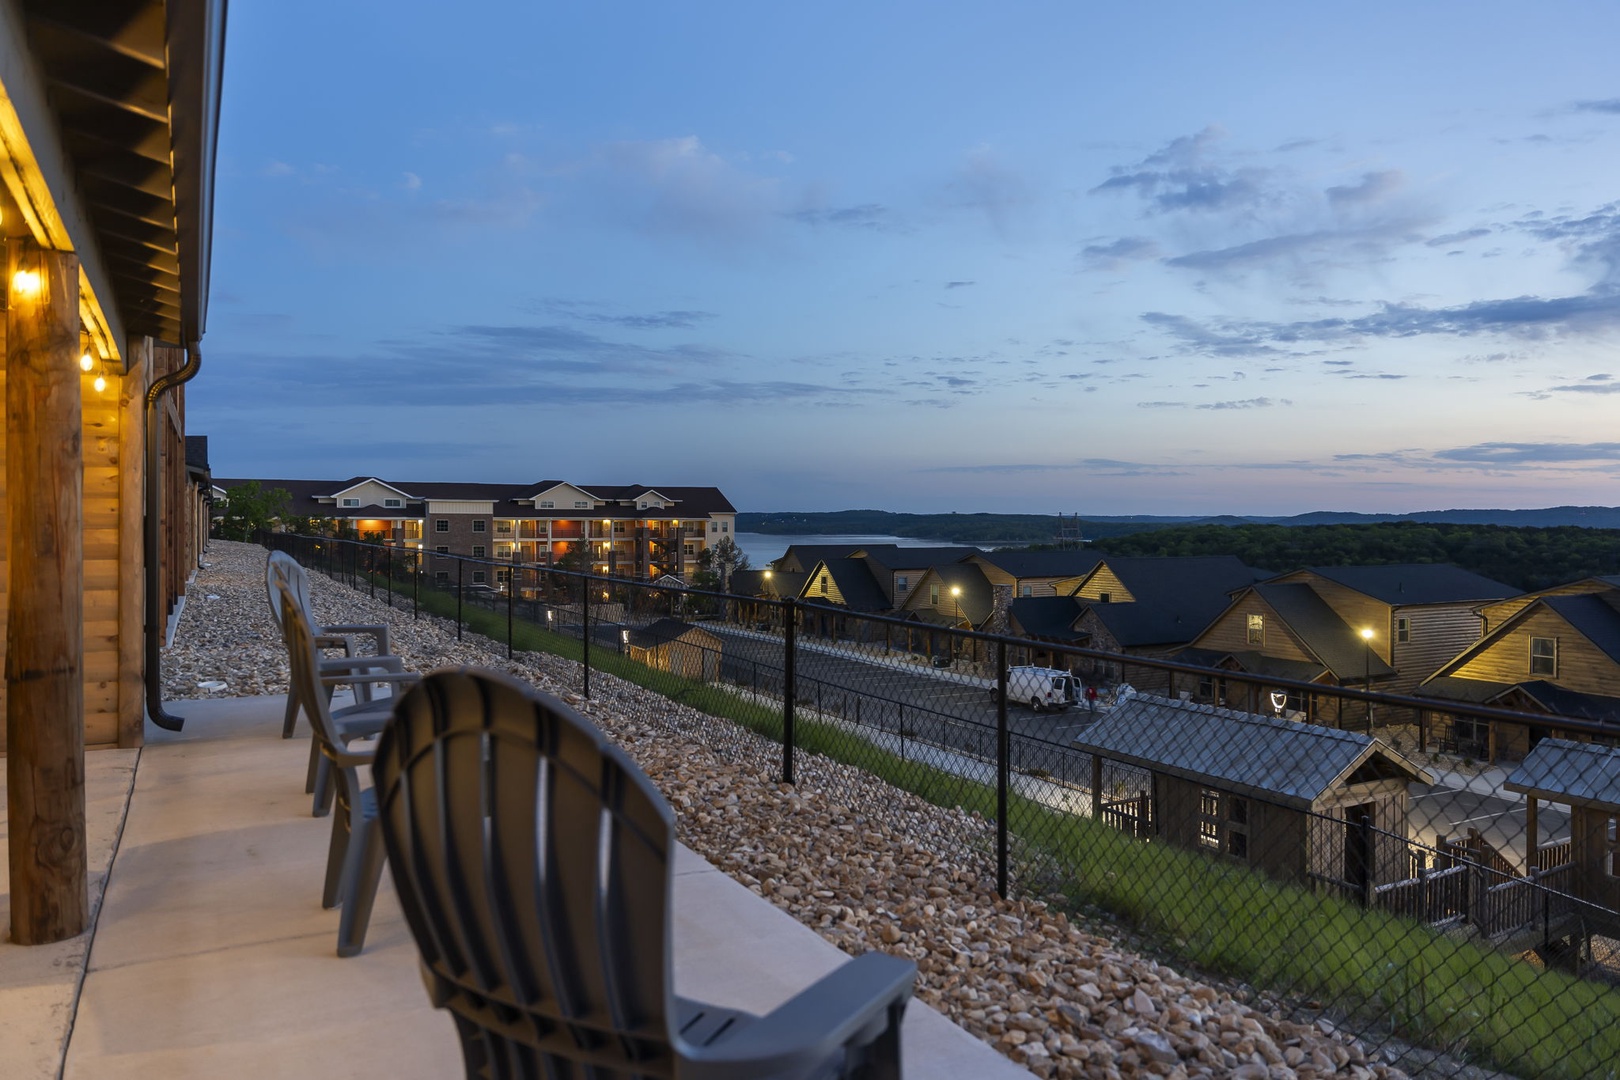 Step out onto the patio & soak in the sweeping, stunning views